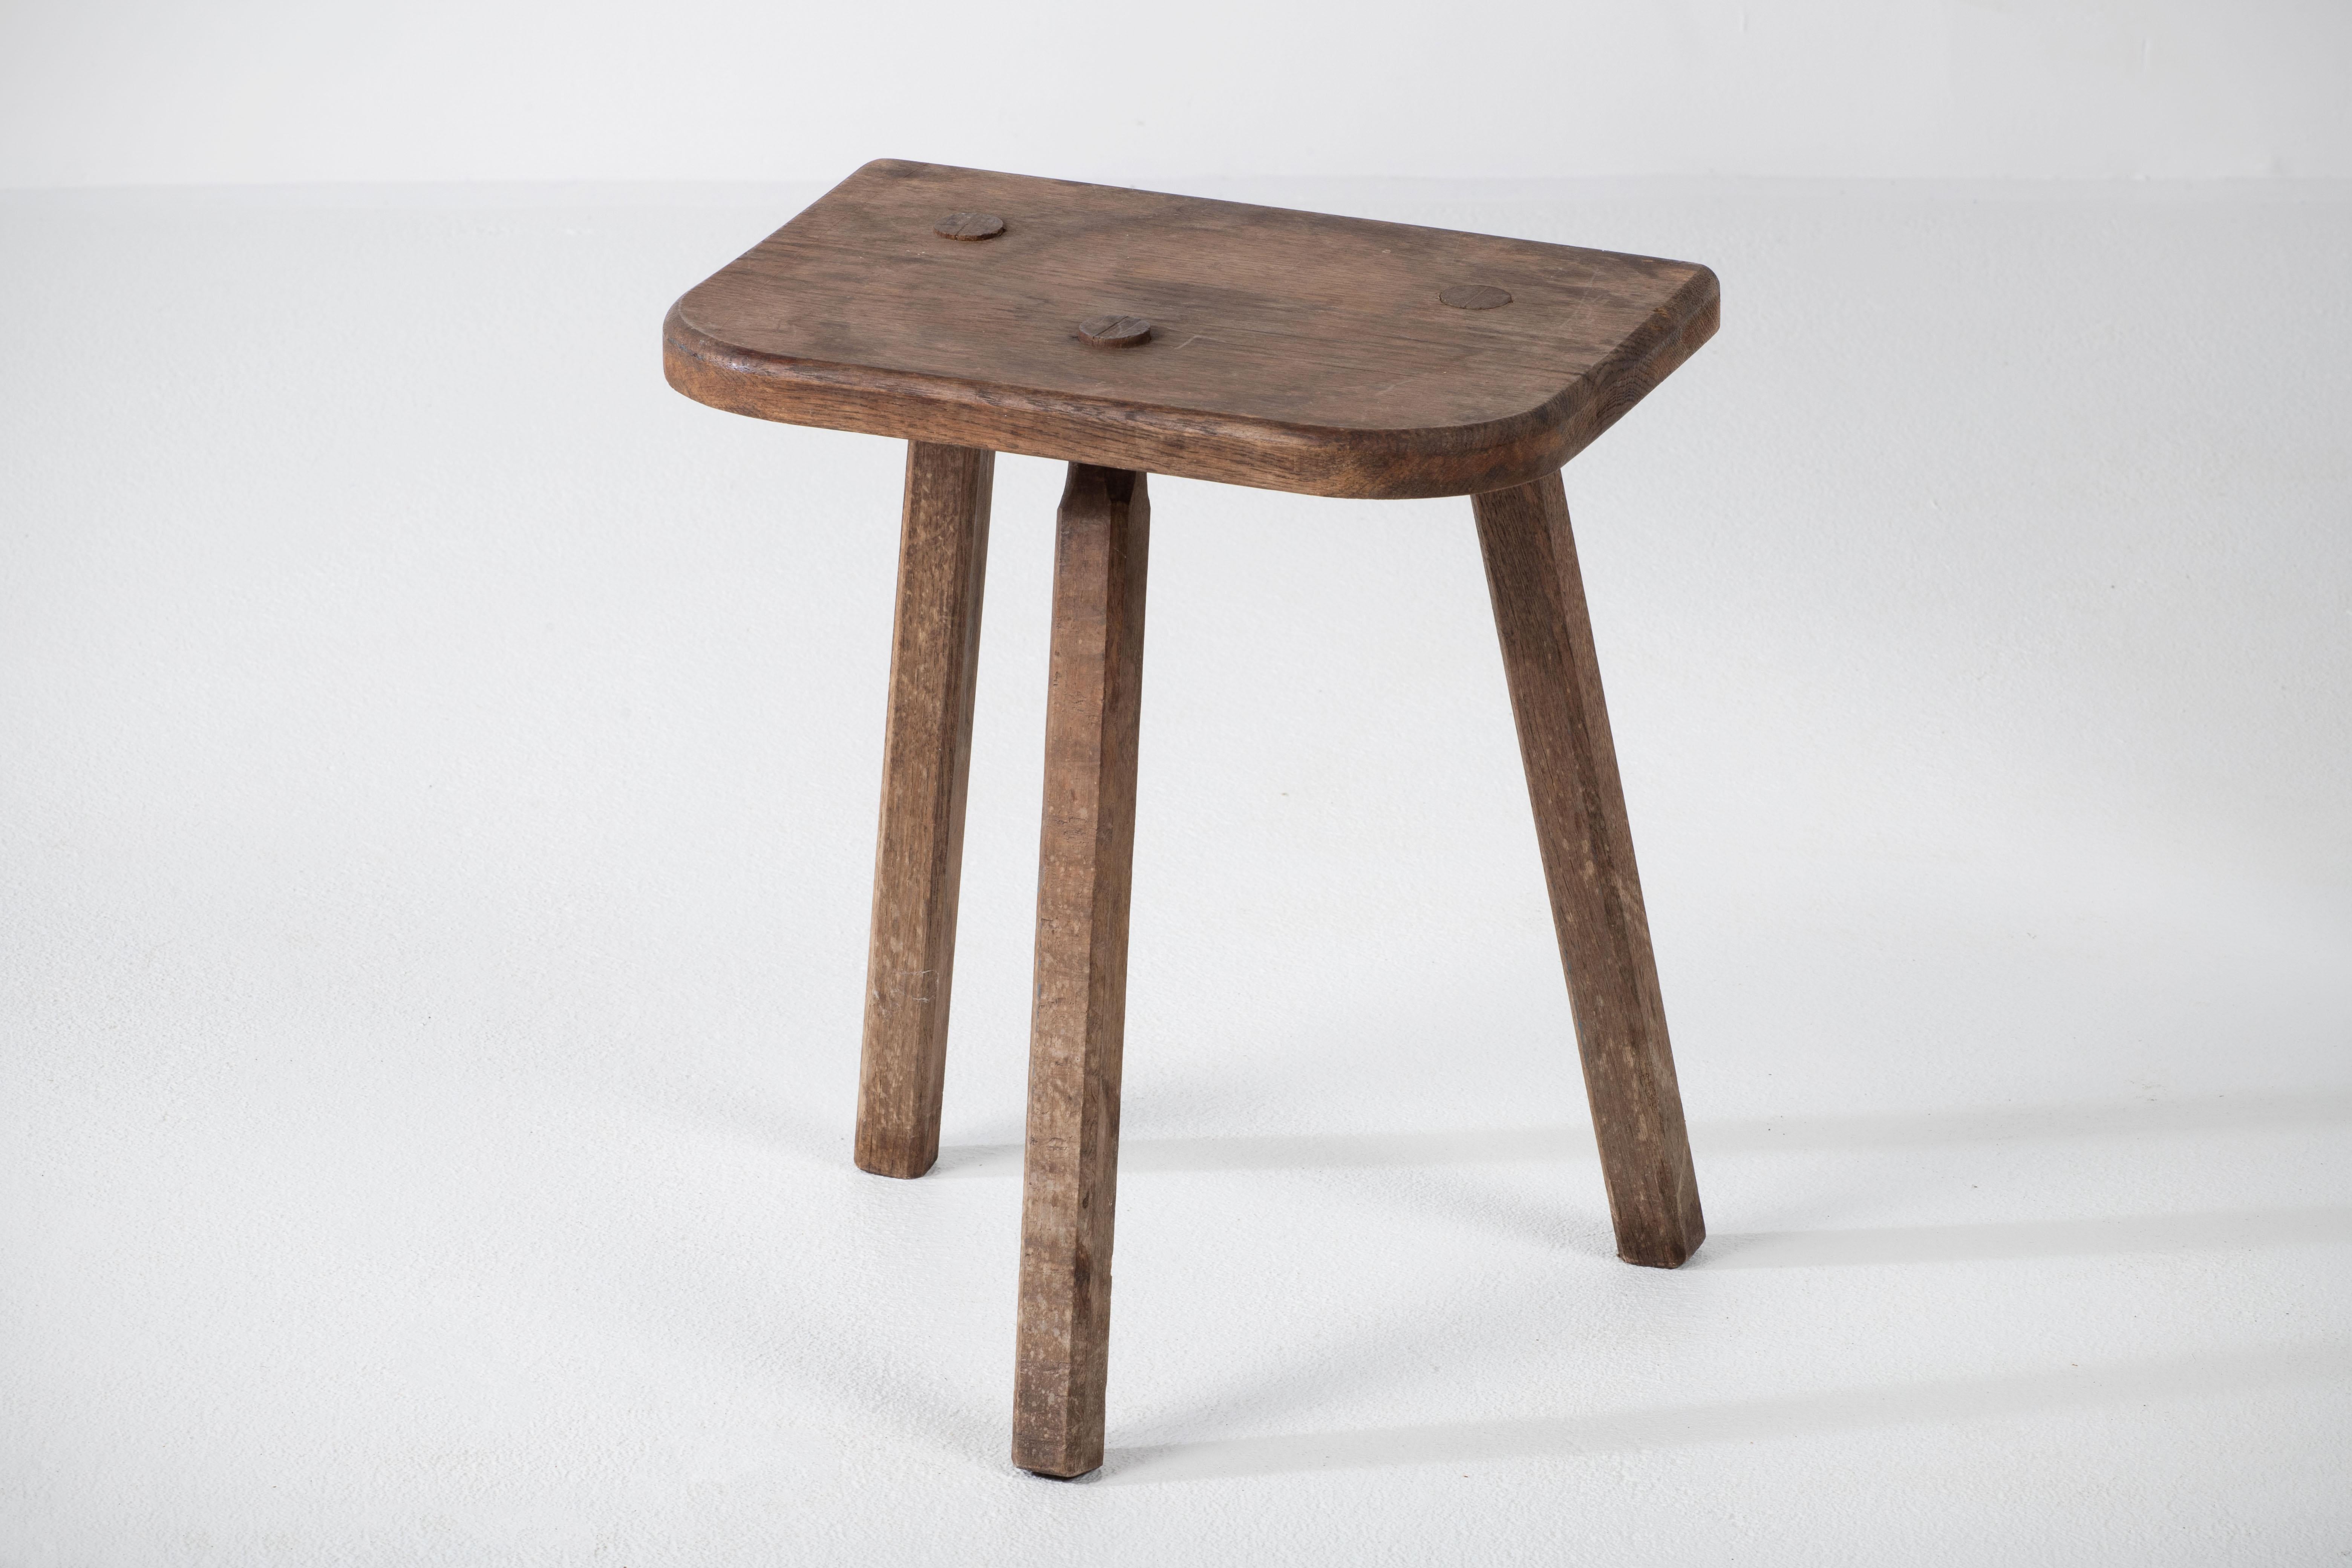 French Primitive Tripod Stool In Good Condition For Sale In Wiesbaden, DE